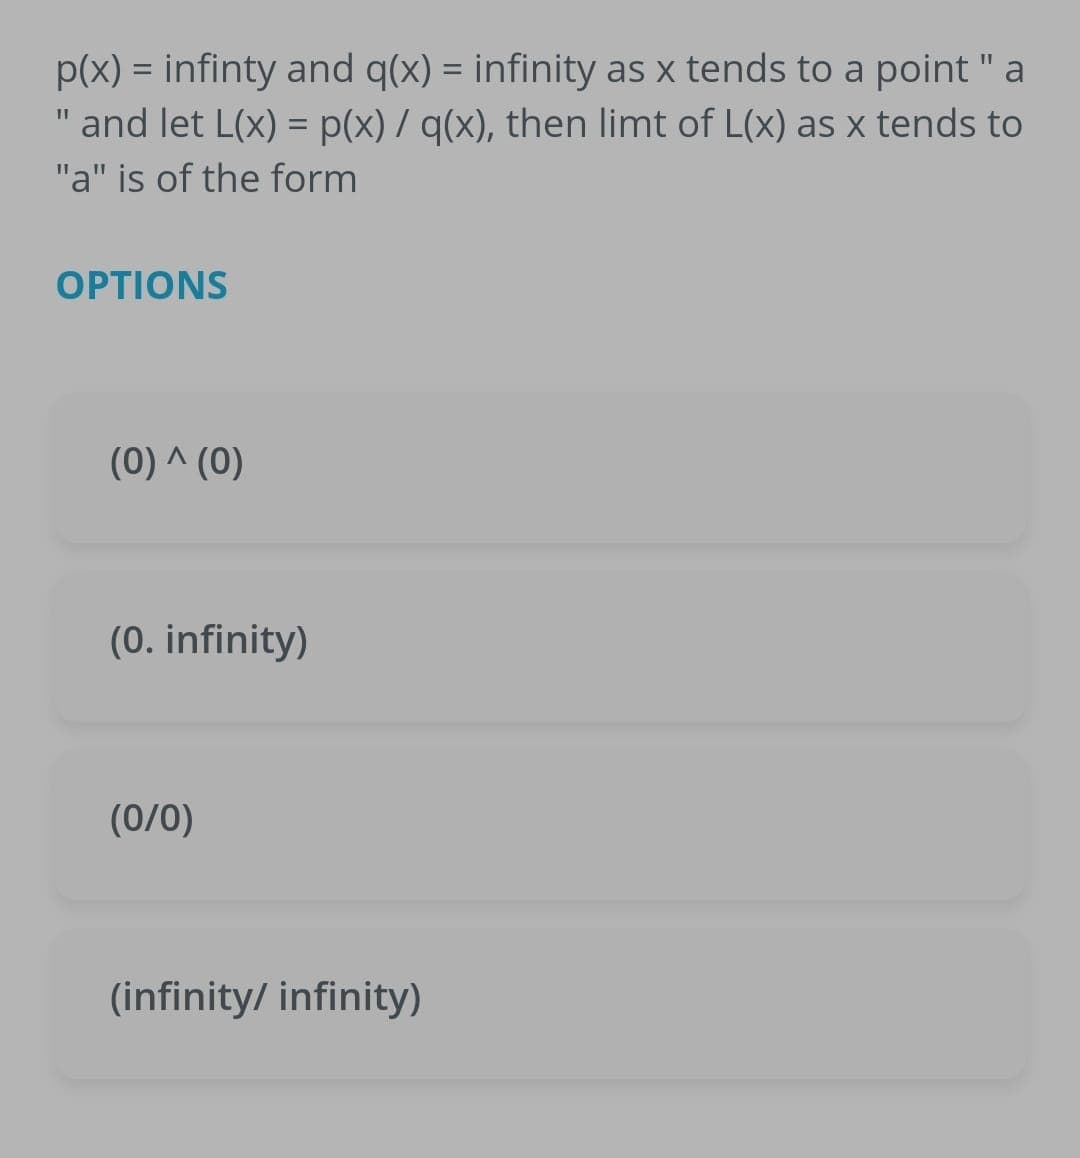 p(x) = infinty and q(x) = infinity as x tends to a point " a
"and let L(x) = p(x) / q(x), then limt of L(x) as x tends to
"a" is of the form
OPTIONS
(0) ^ (0)
(0. infinity)
(0/0)
(infinity/ infinity)
